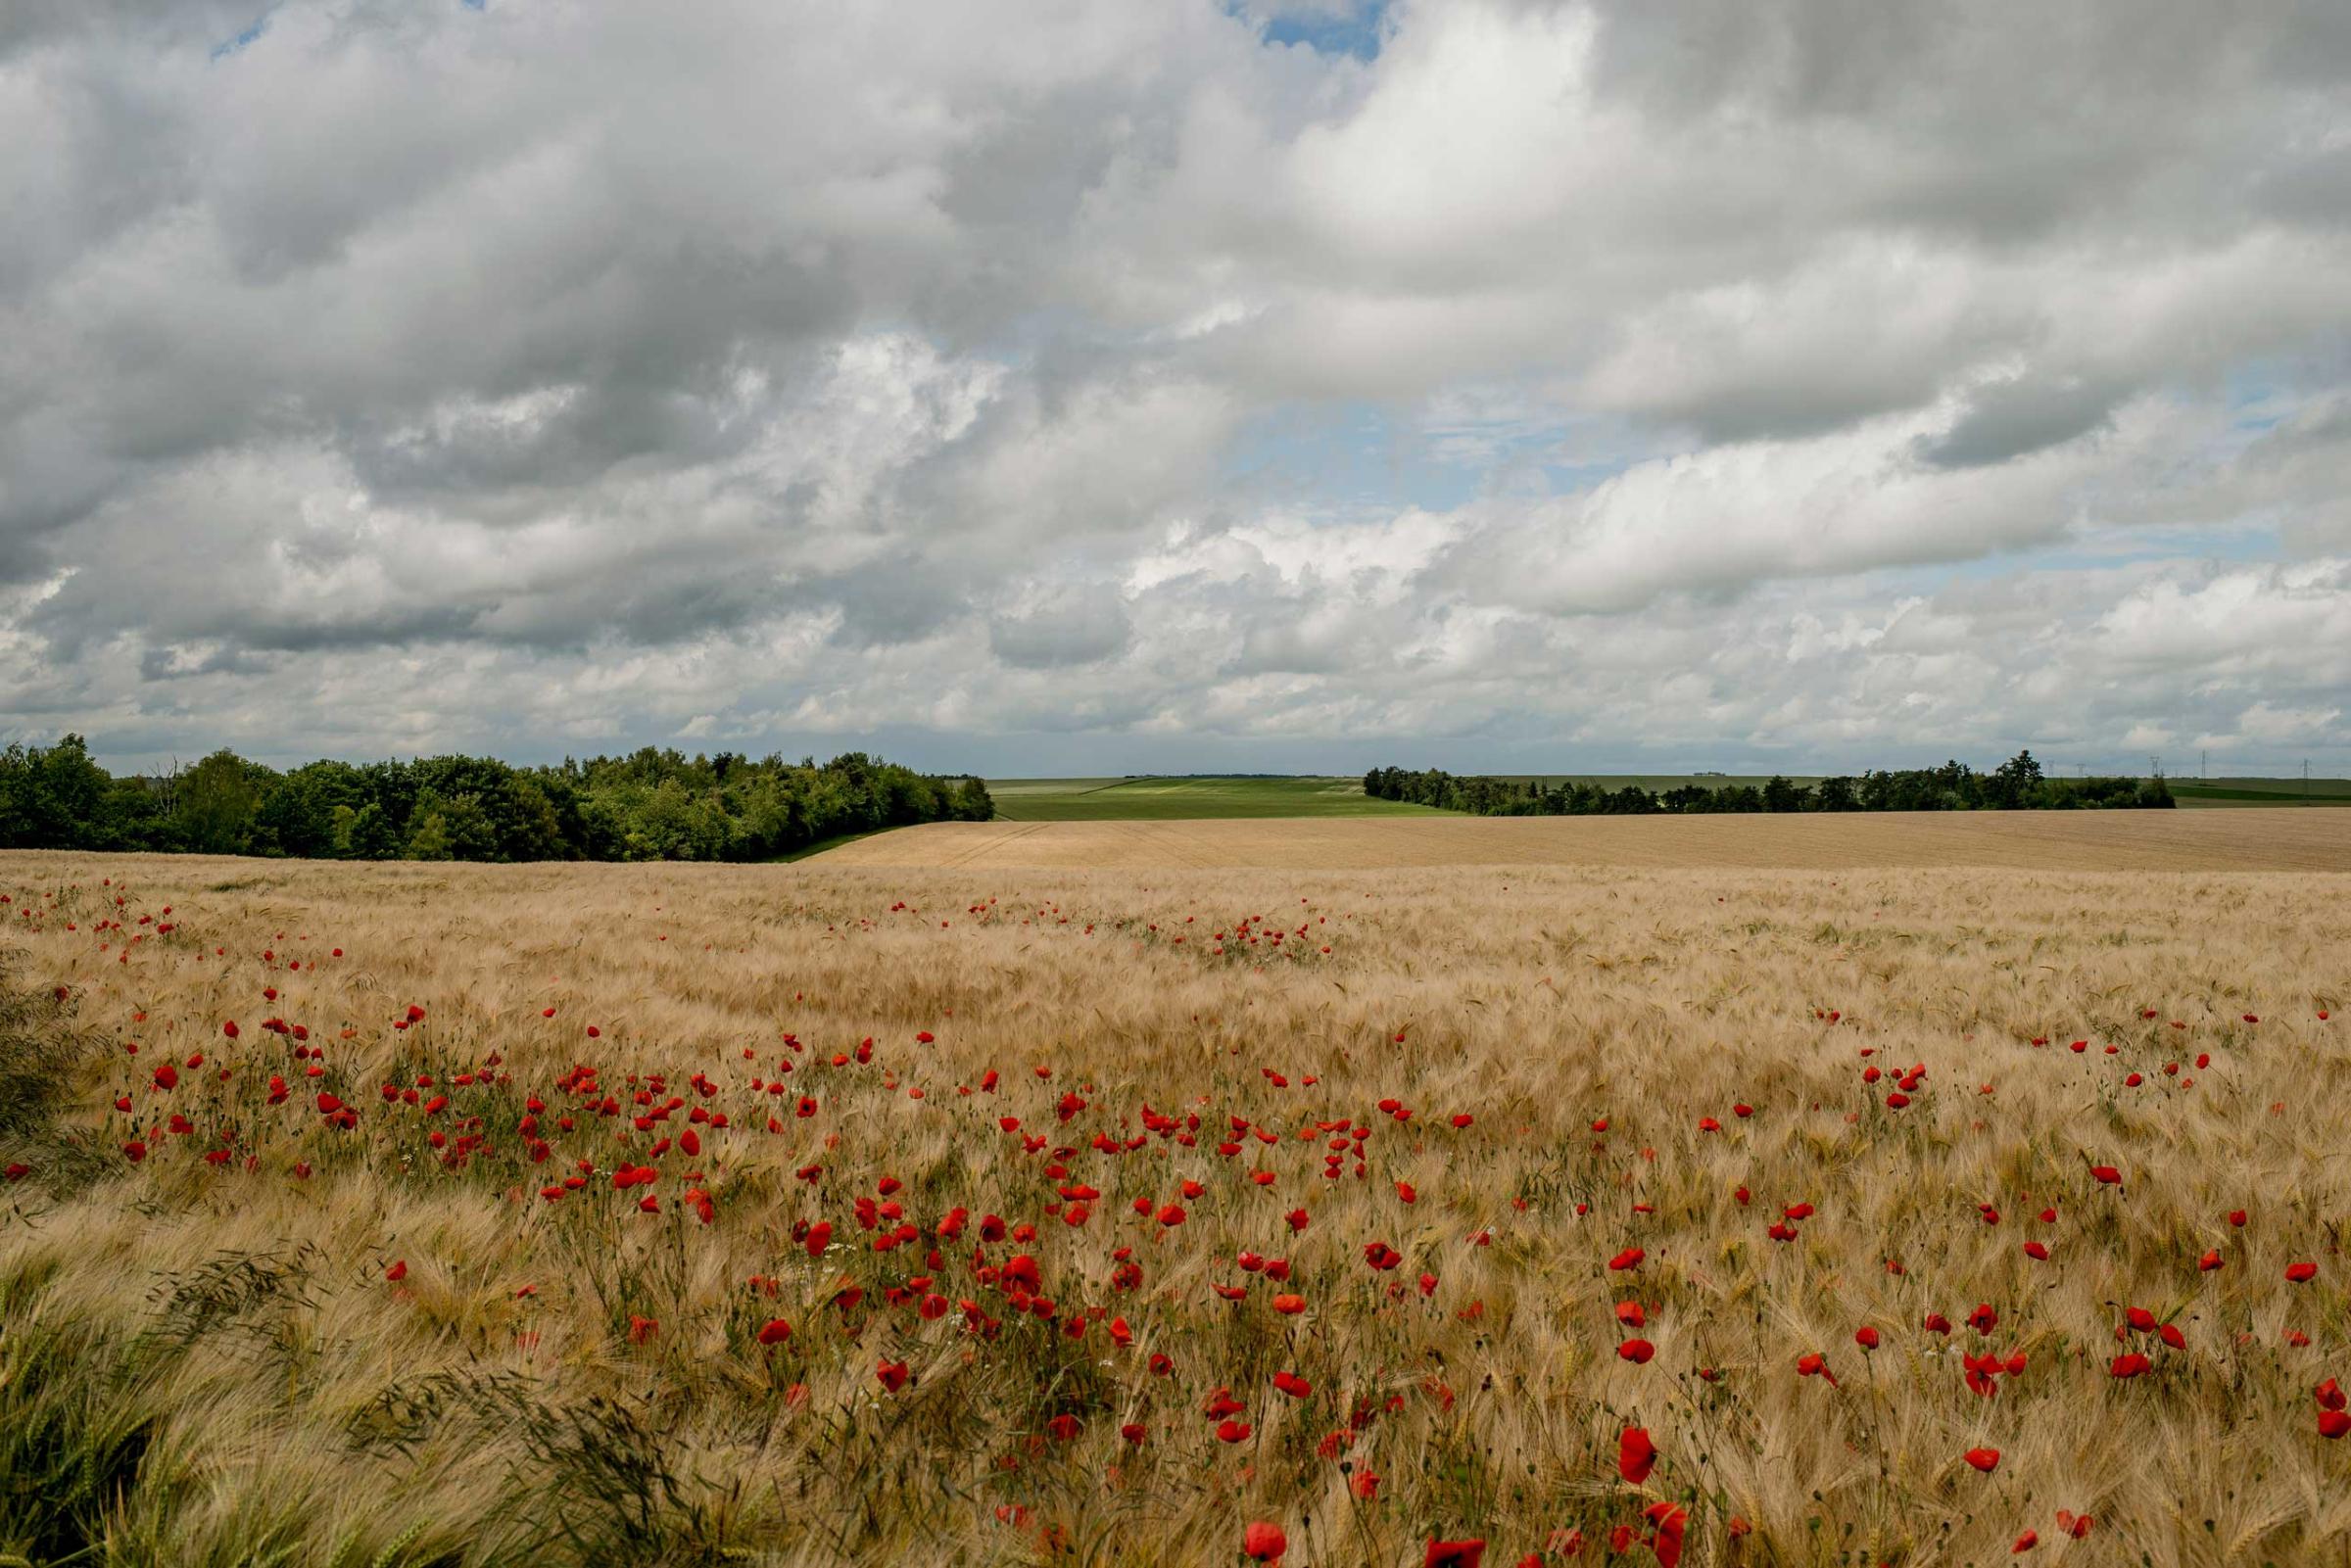 Poppies bloom amid wheat fields that were once the front line during World War I in Marne, France, June 4, 2014.